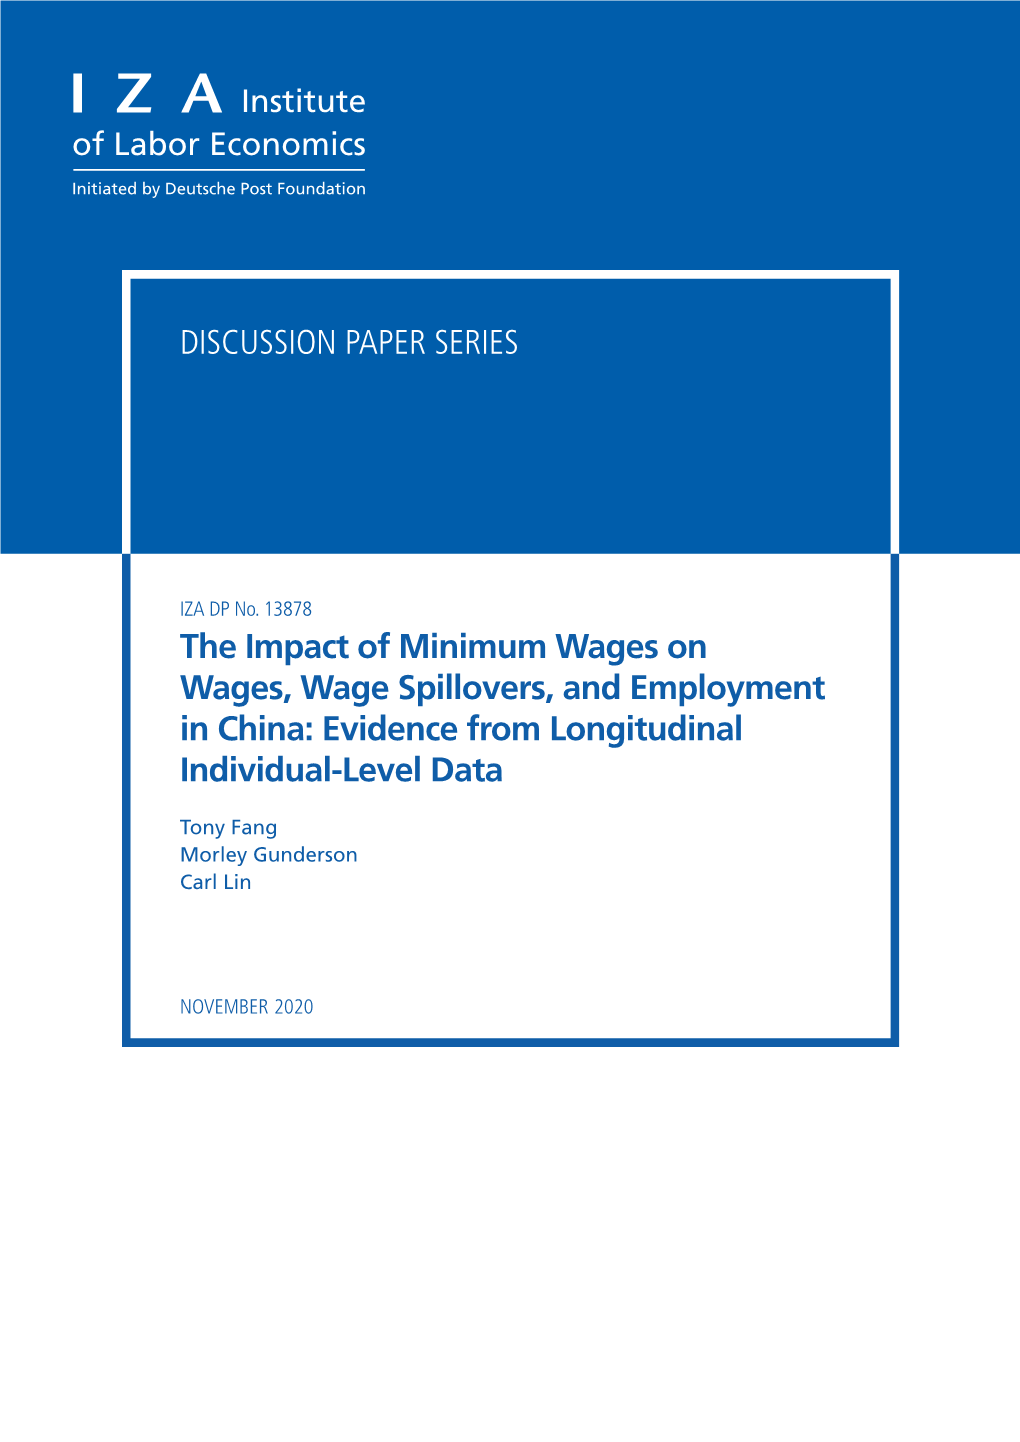 The Impact of Minimum Wages on Wages, Wage Spillovers, and Employment in China: Evidence from Longitudinal Individual-Level Data